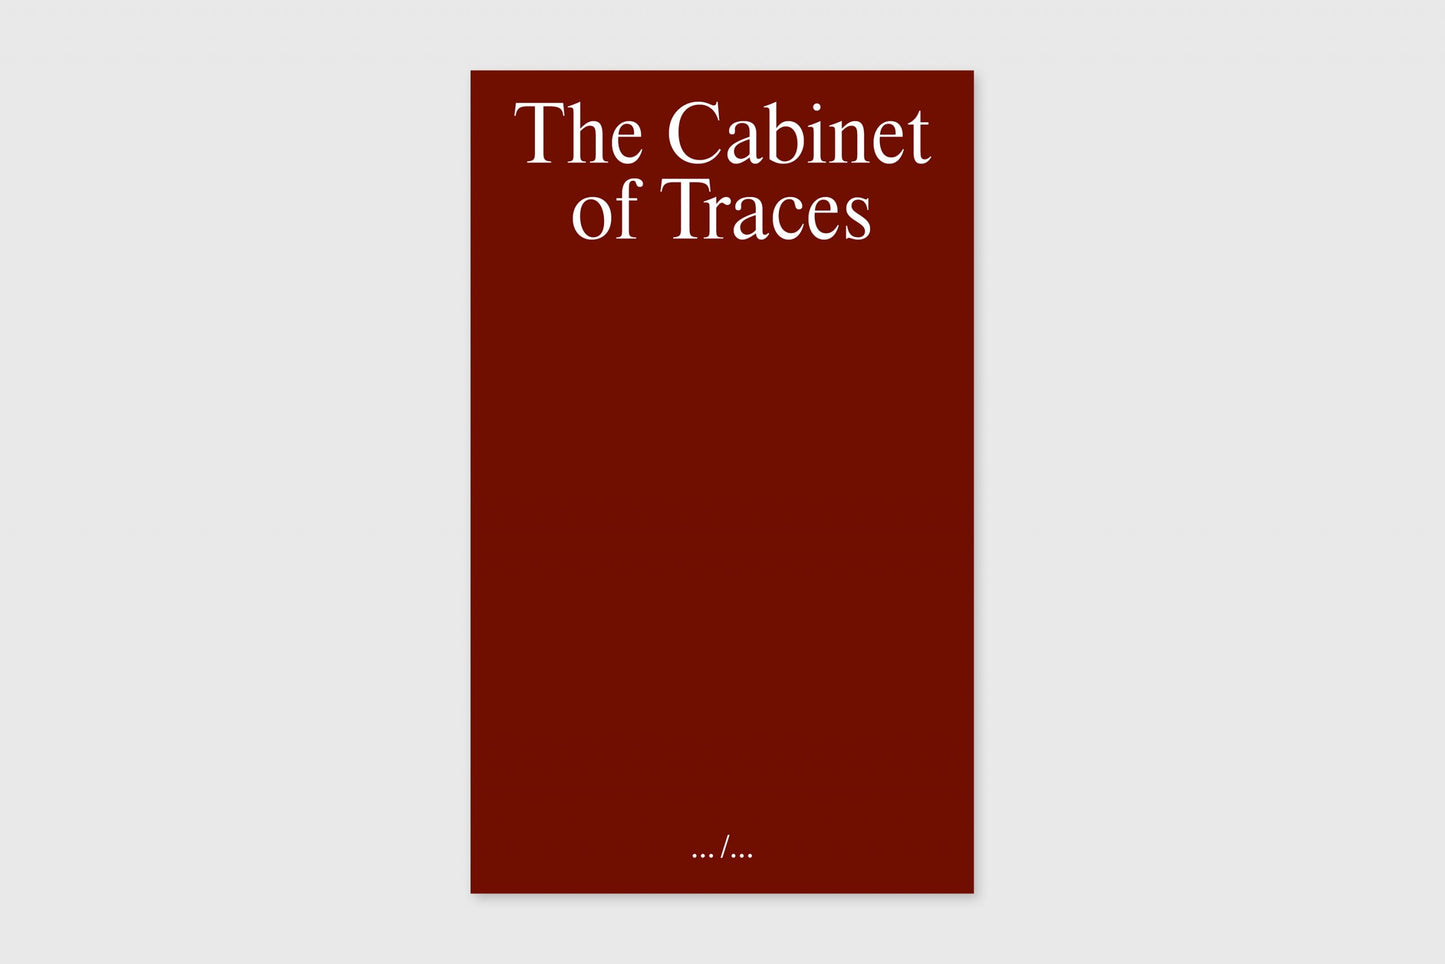 The Cabinet of Traces